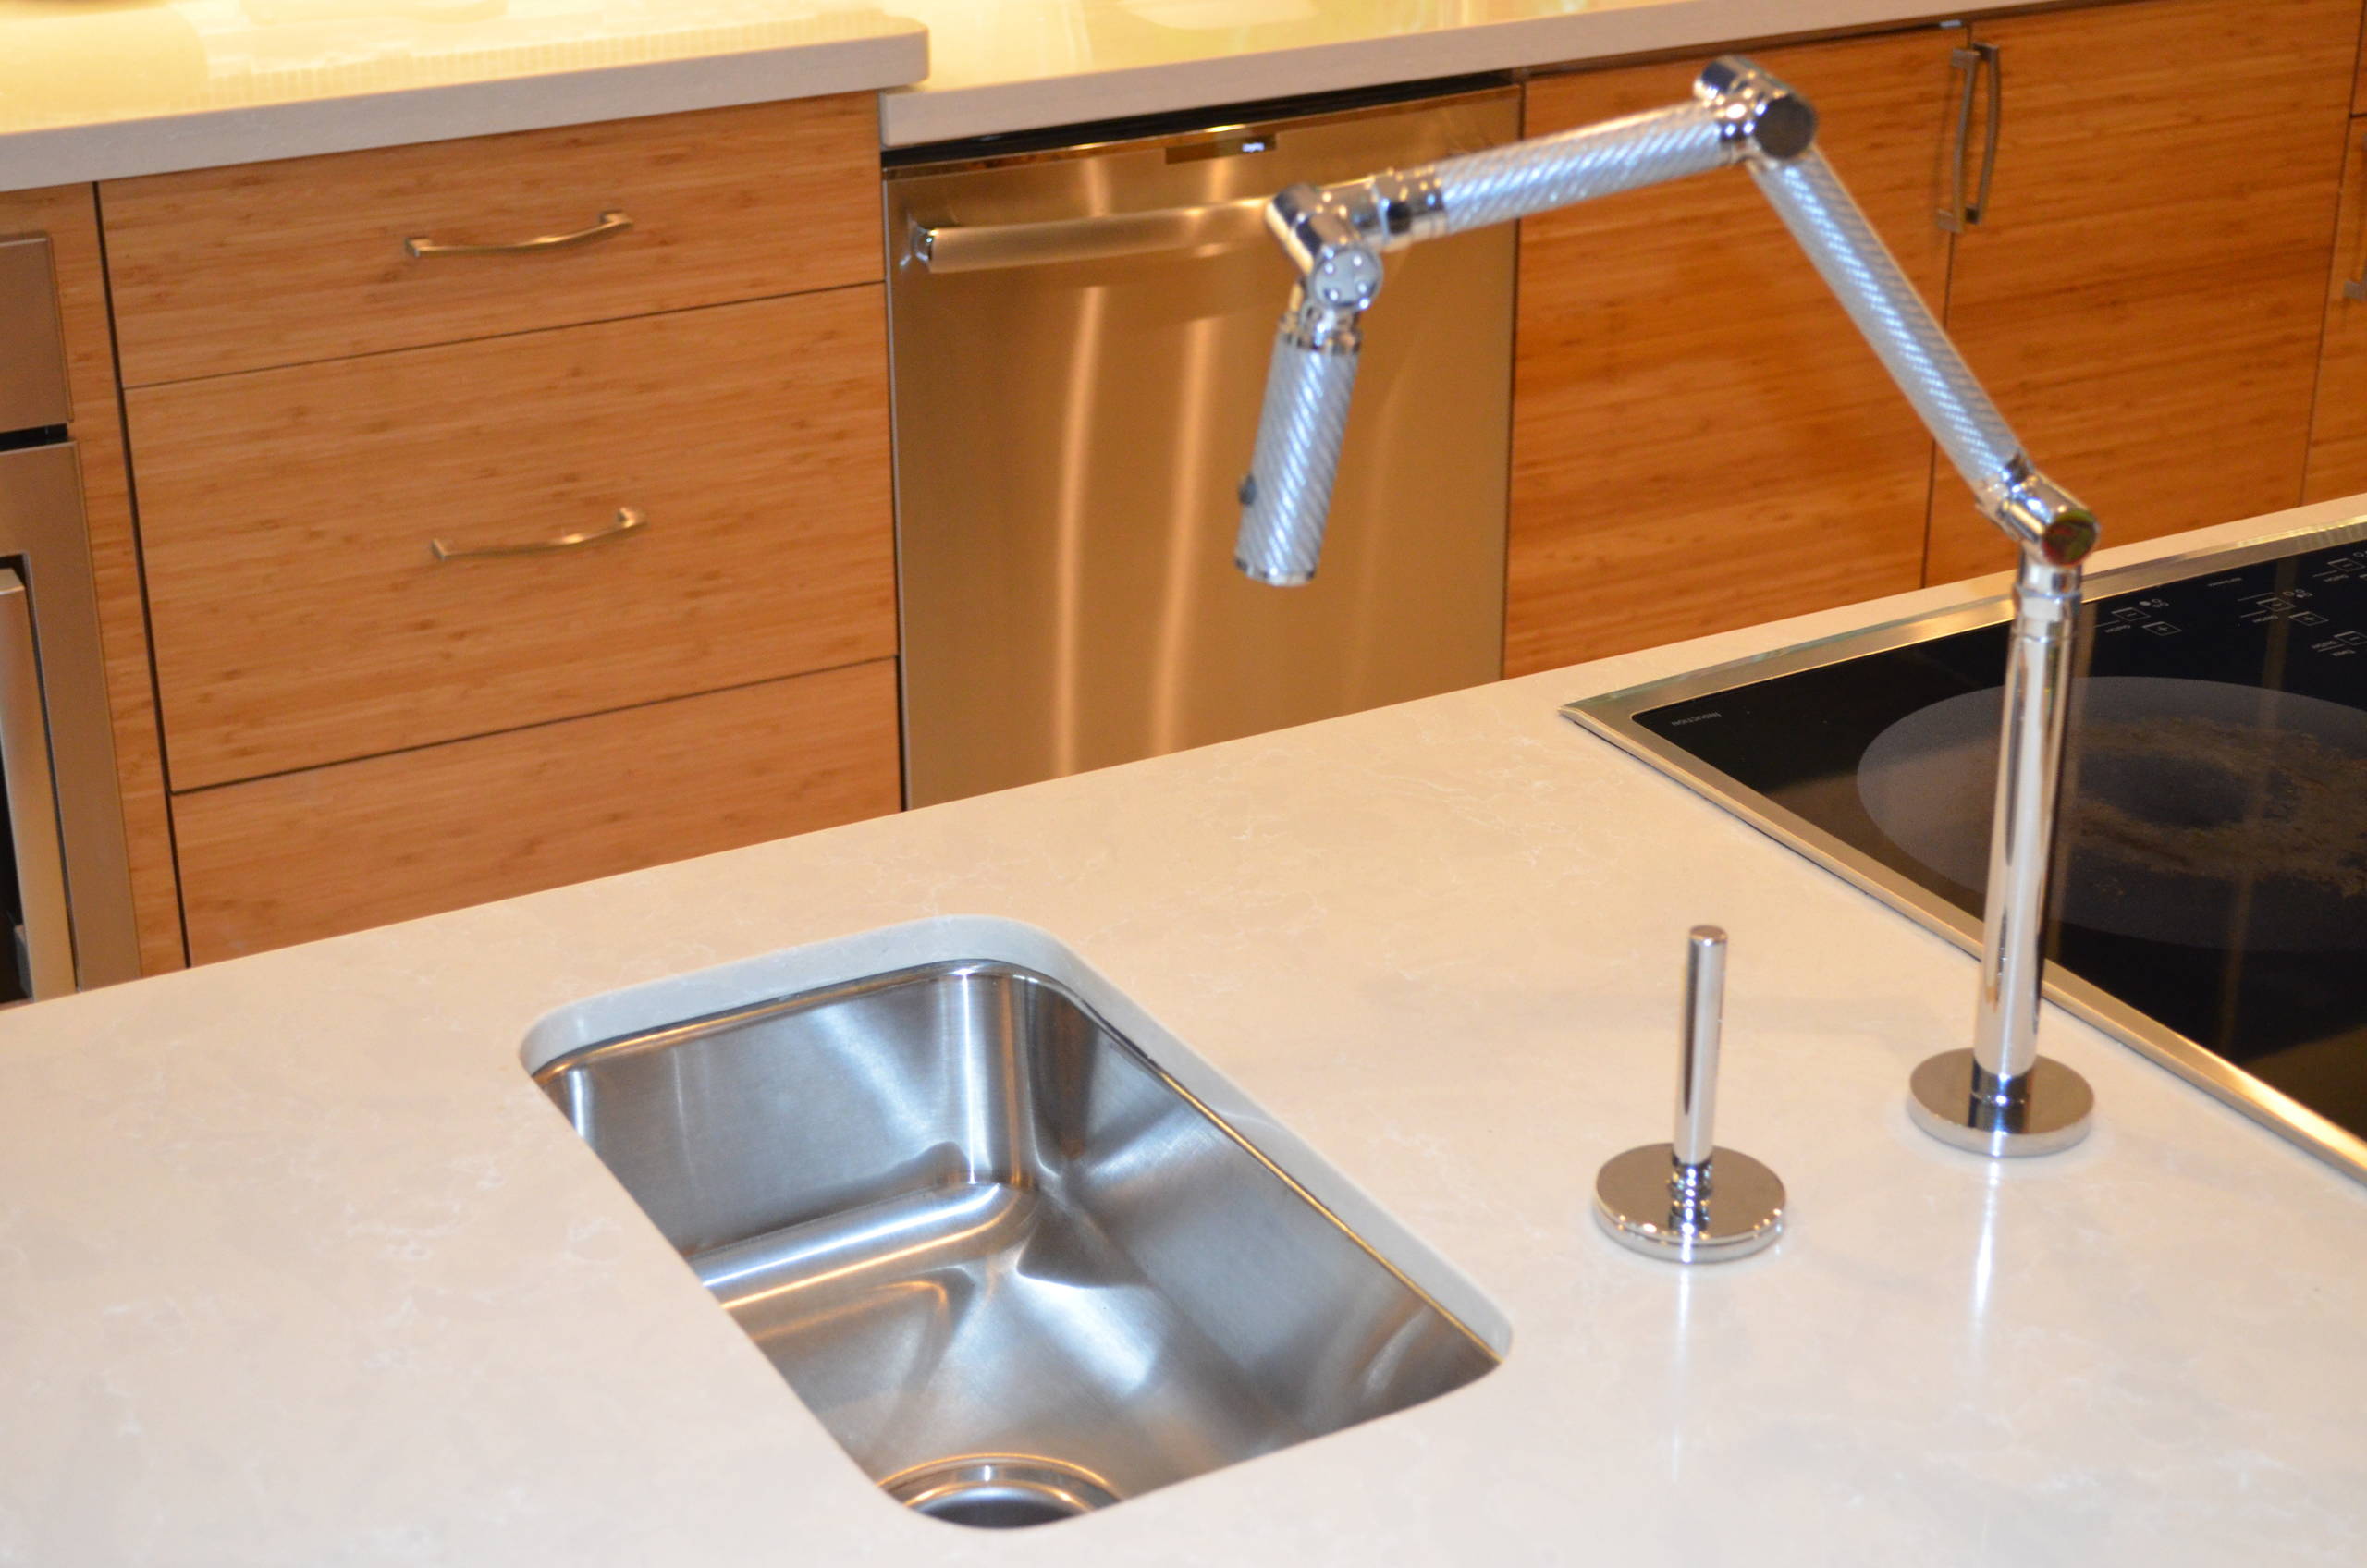 Universal Design Kitchen for accessibility and aging in place